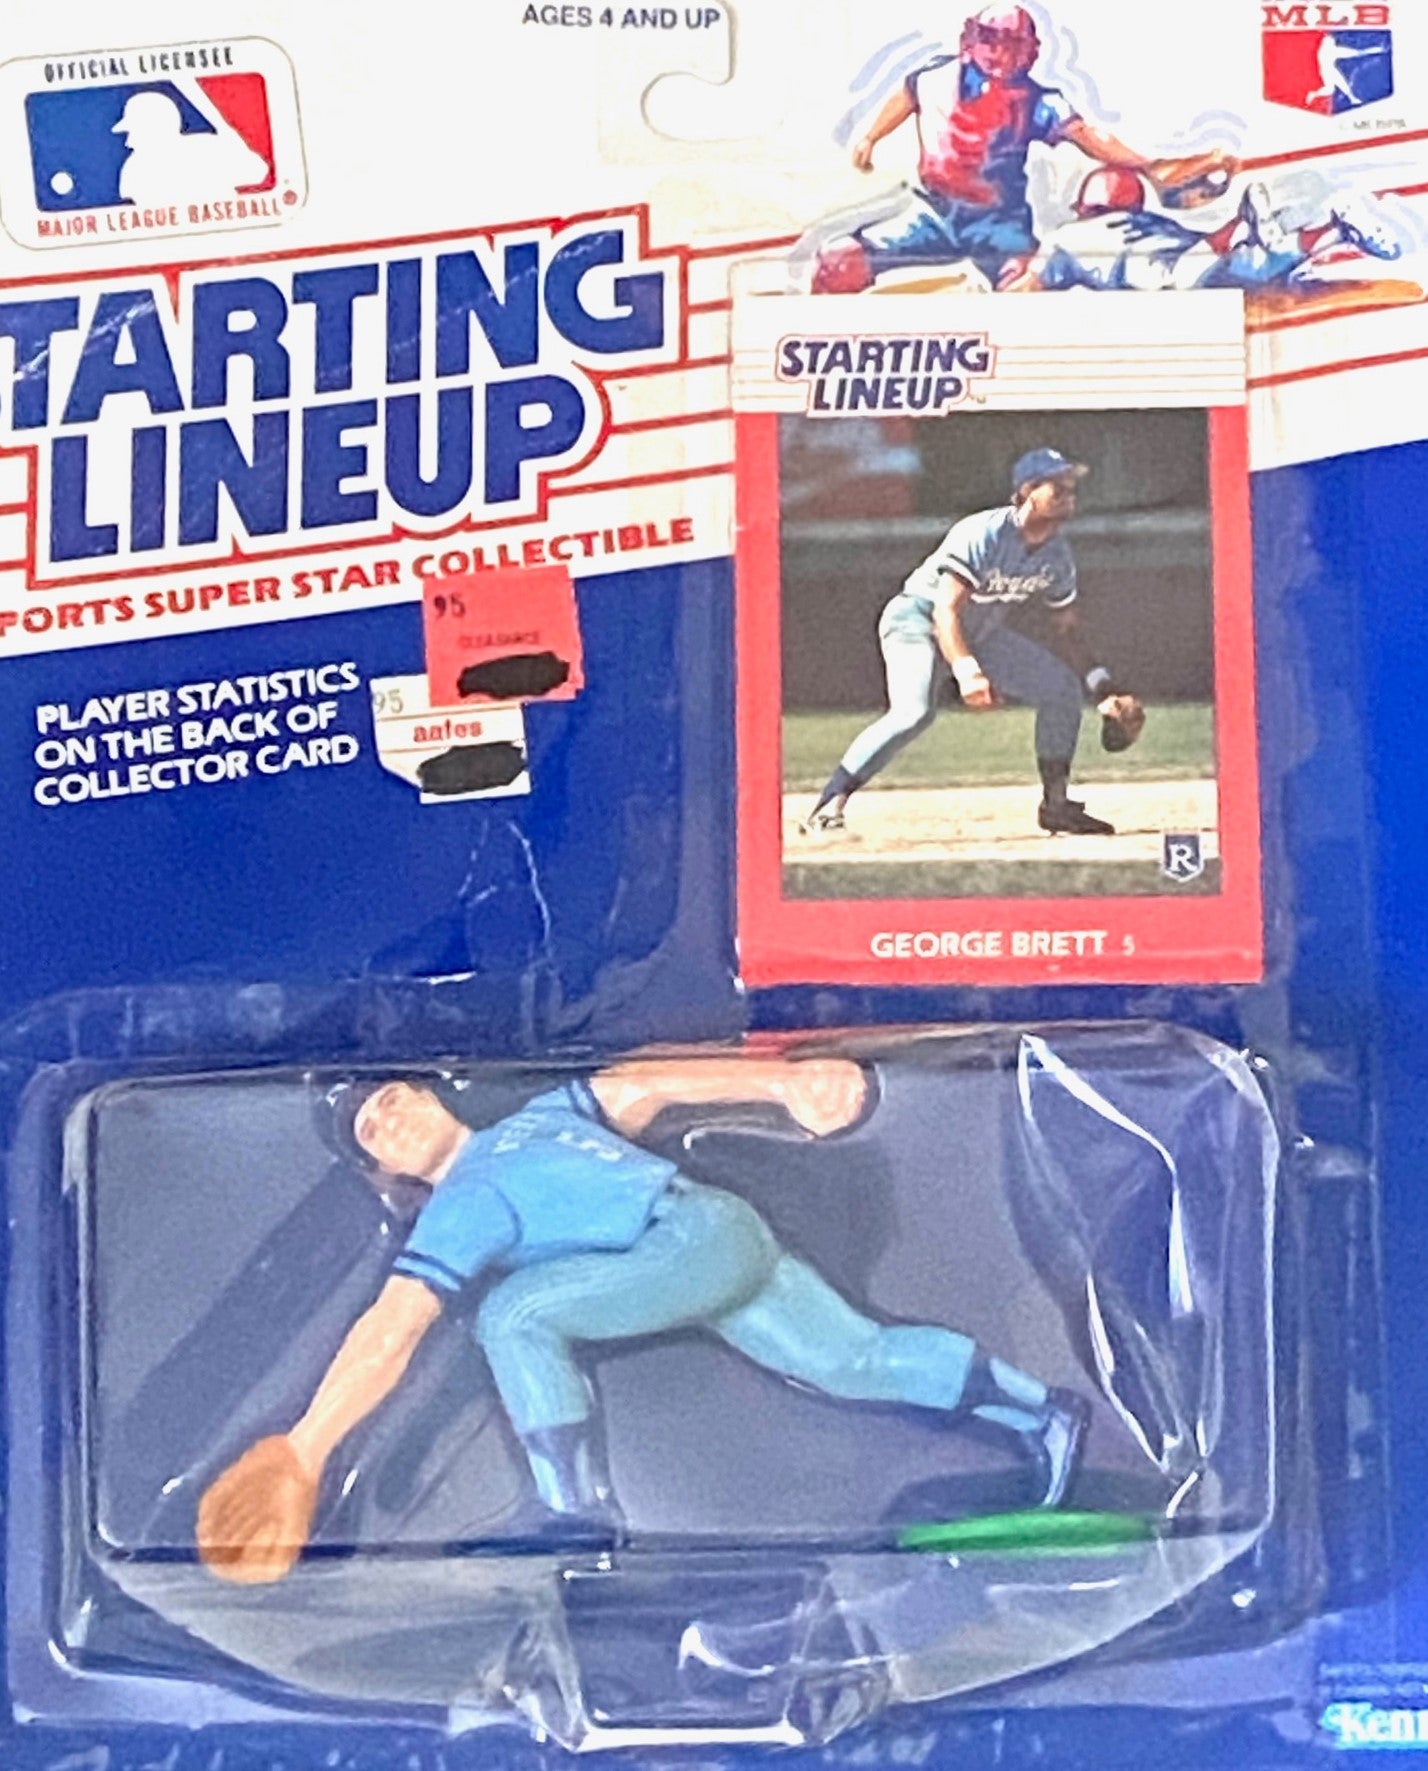 George Brett 1988 Kansas City Royals MLB Starting Lineup Figurine and Player Card by Kenner